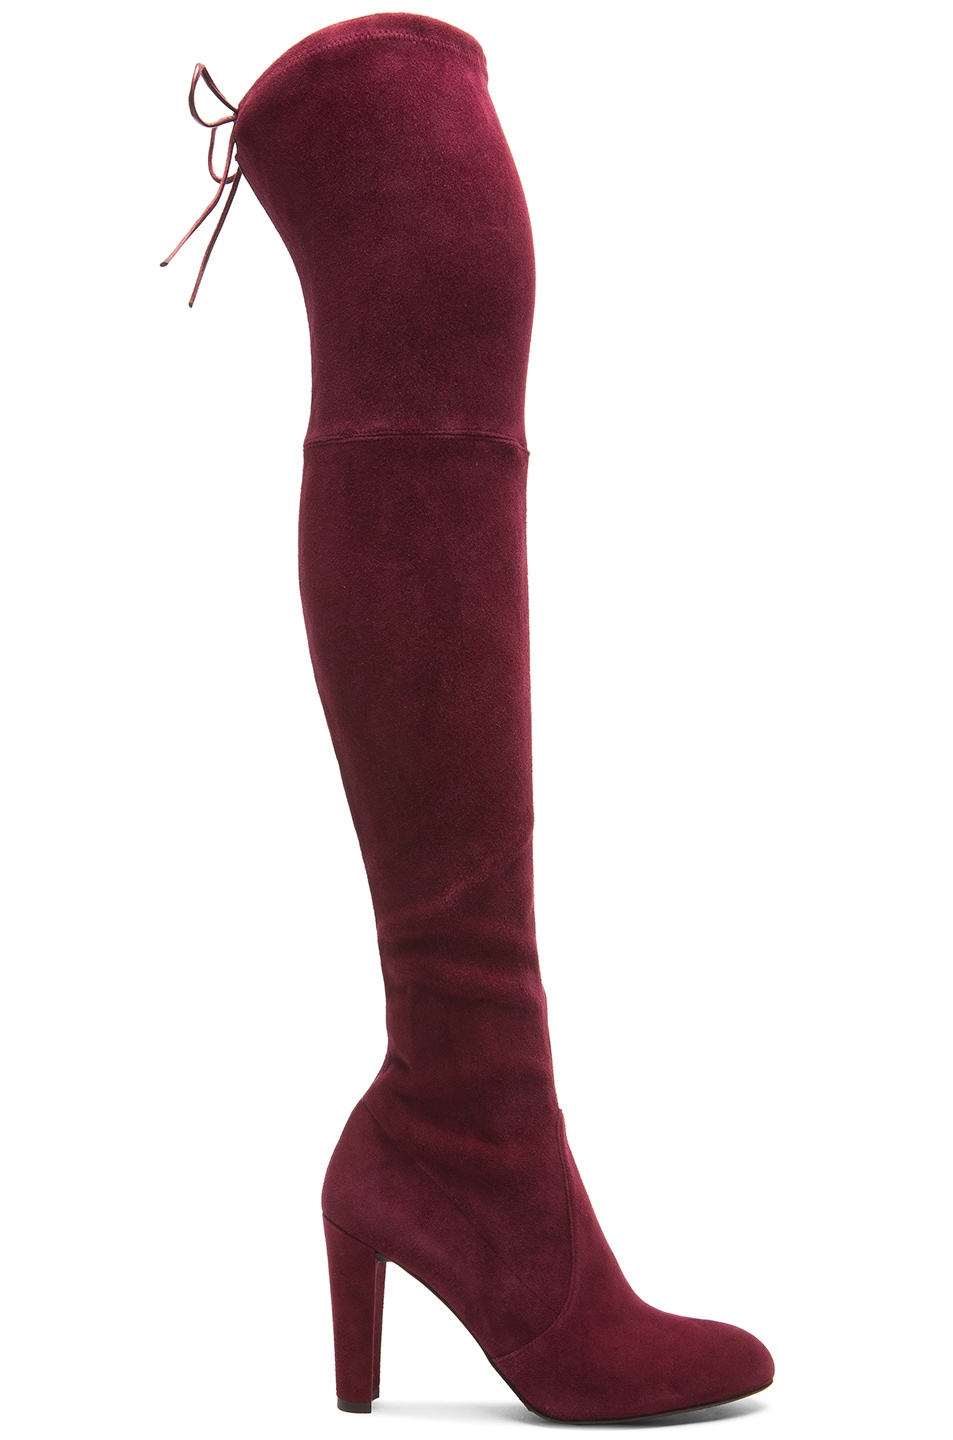 Image 1 of Stuart Weitzman Highland Suede Boots in Bordeaux Suede